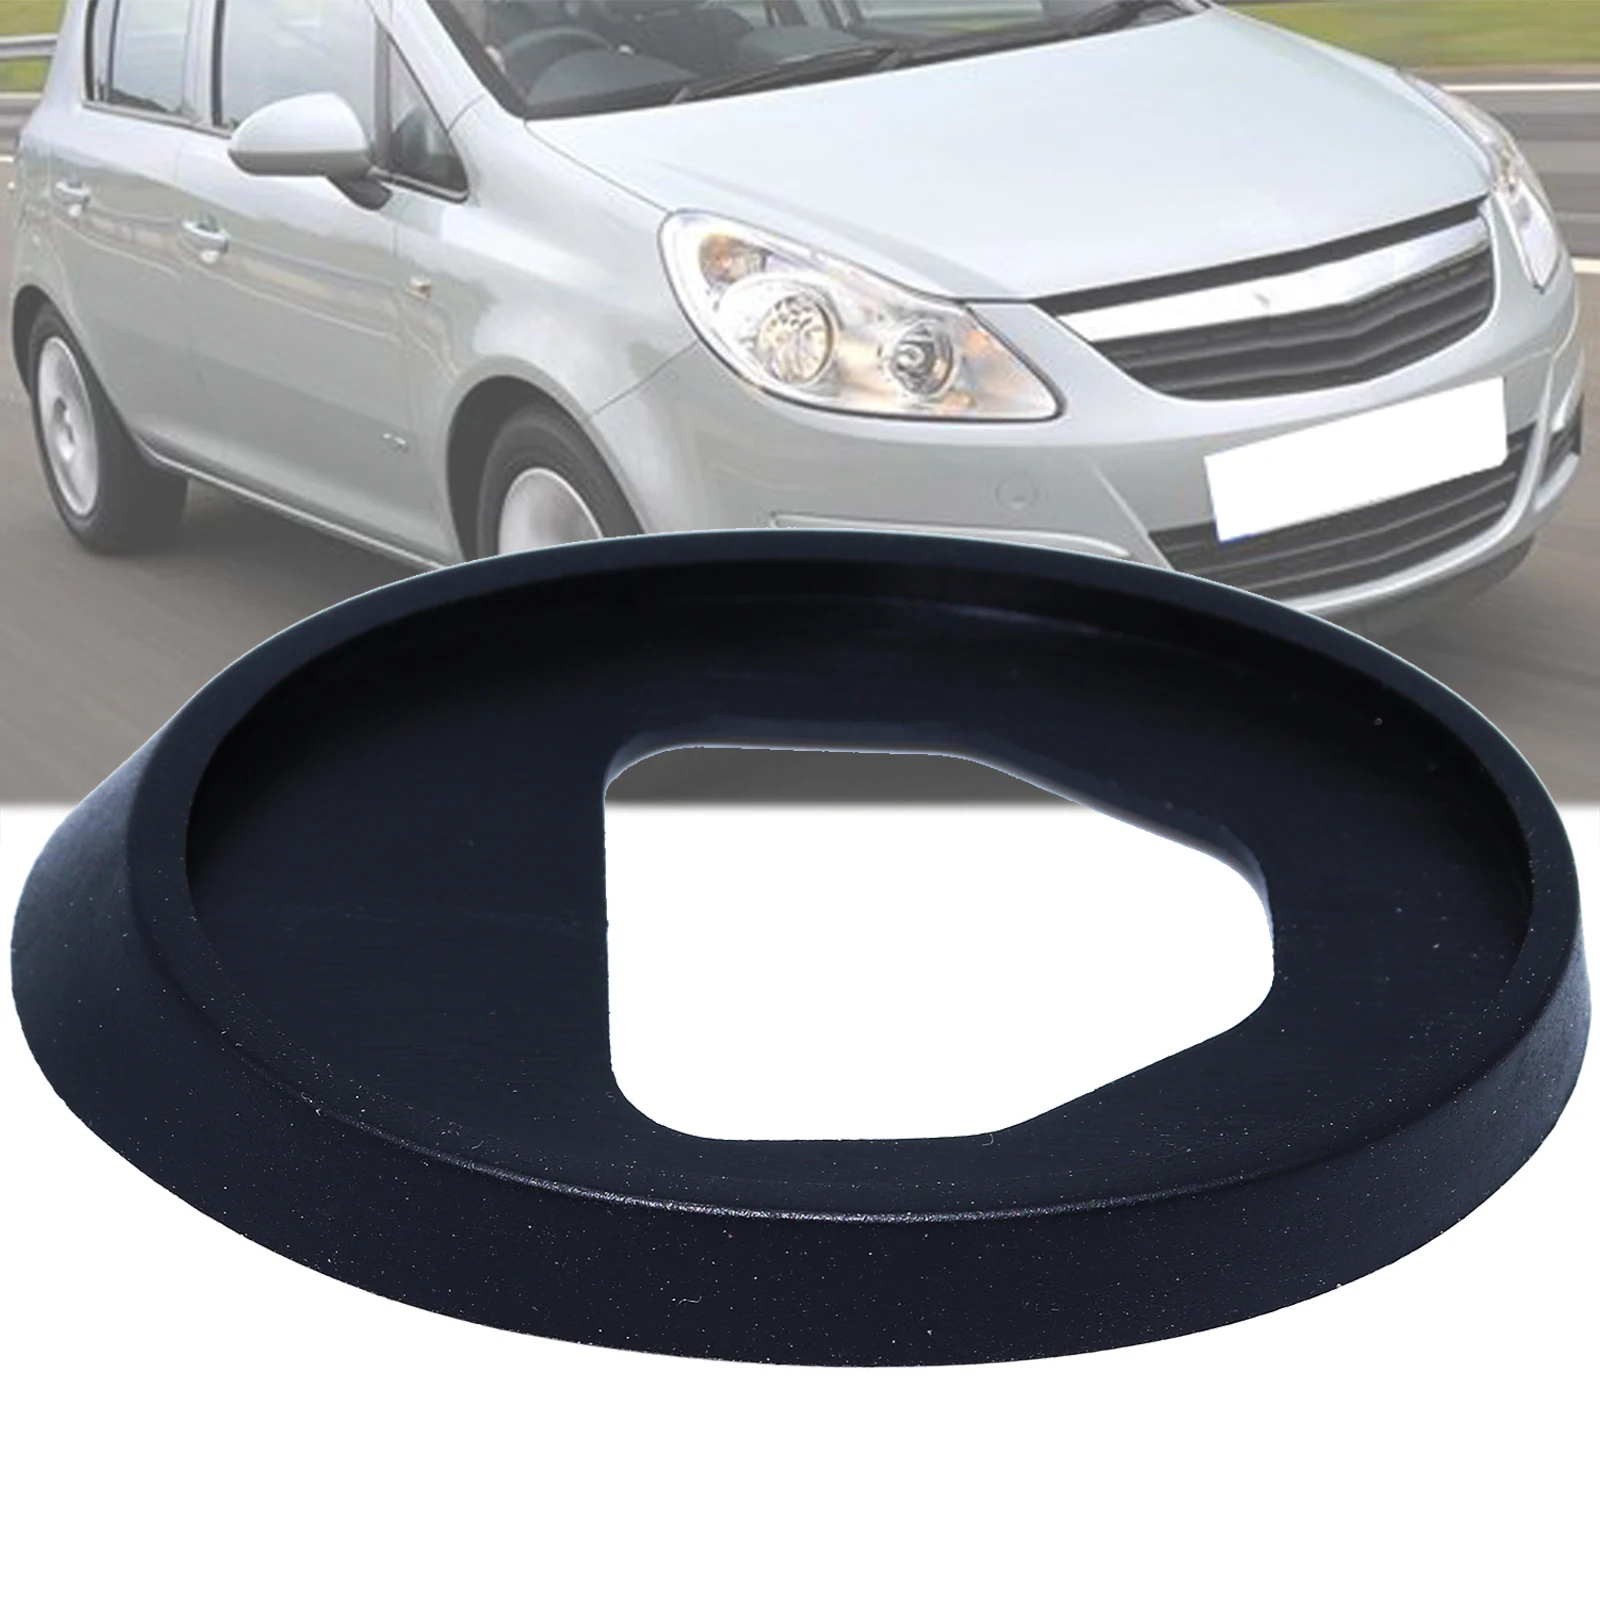 

For Opel Zafira B 2005 - 2014 Vauxhall Astra F Corsa B C D Vectra C Signum Roof Mast Whip Aerial Antenna Rubber Base Gasket Seal